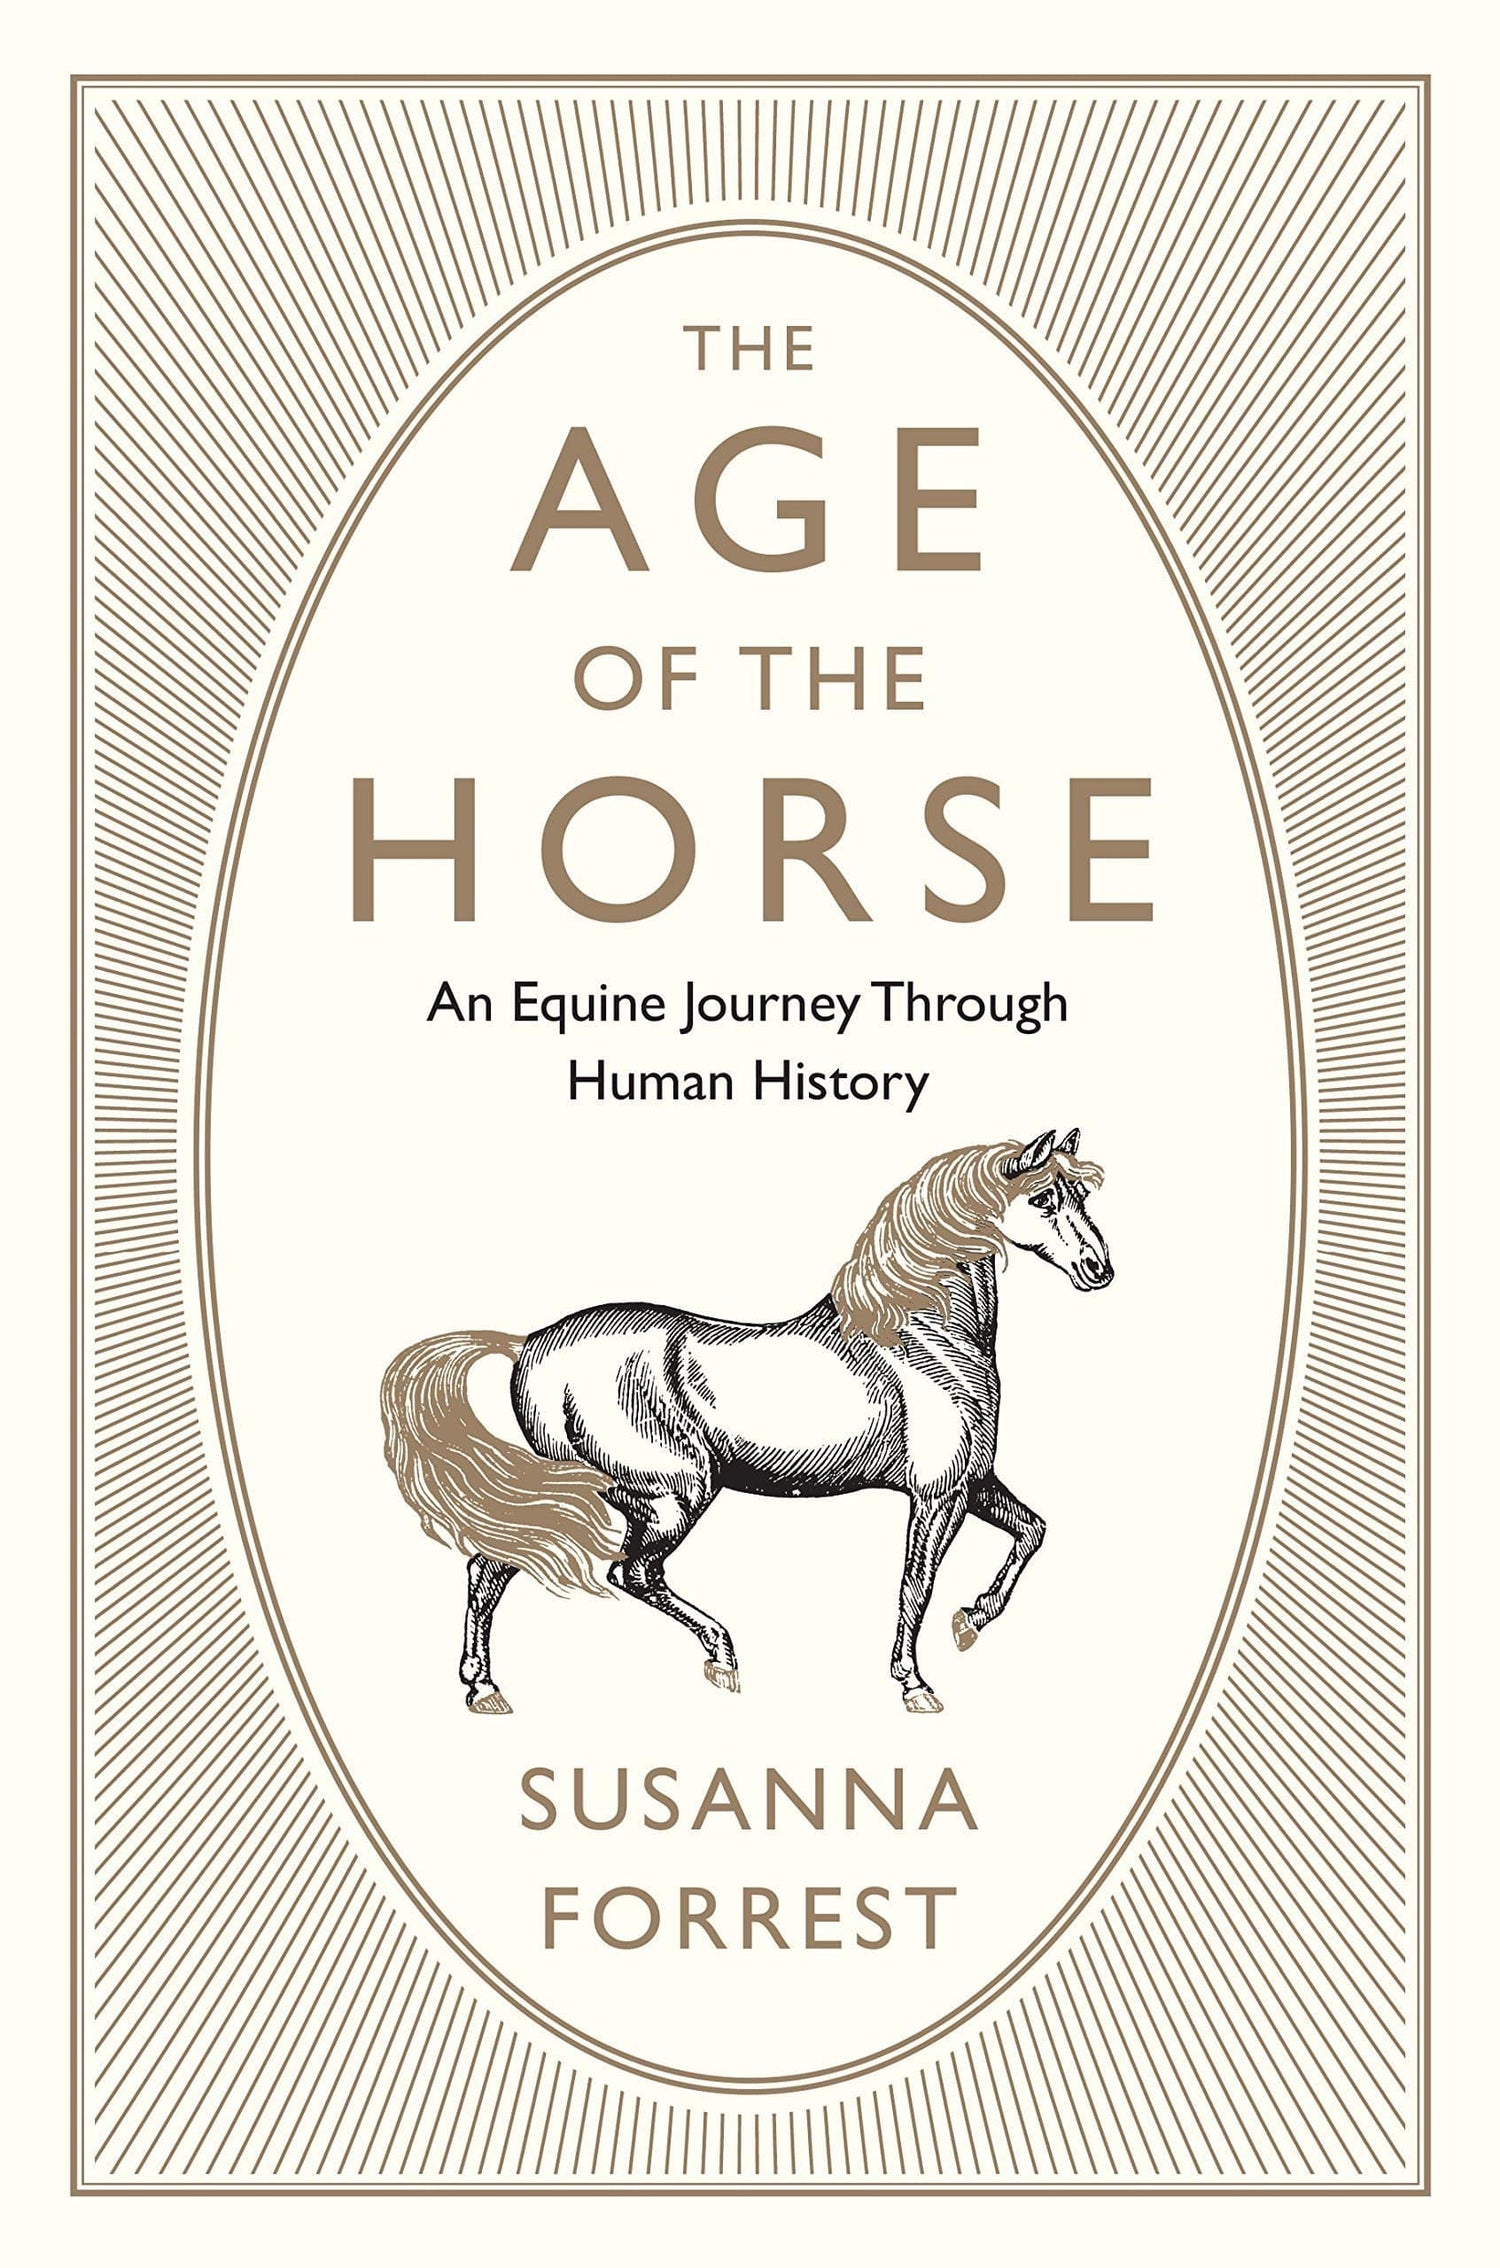 AGE OF THE HORSE